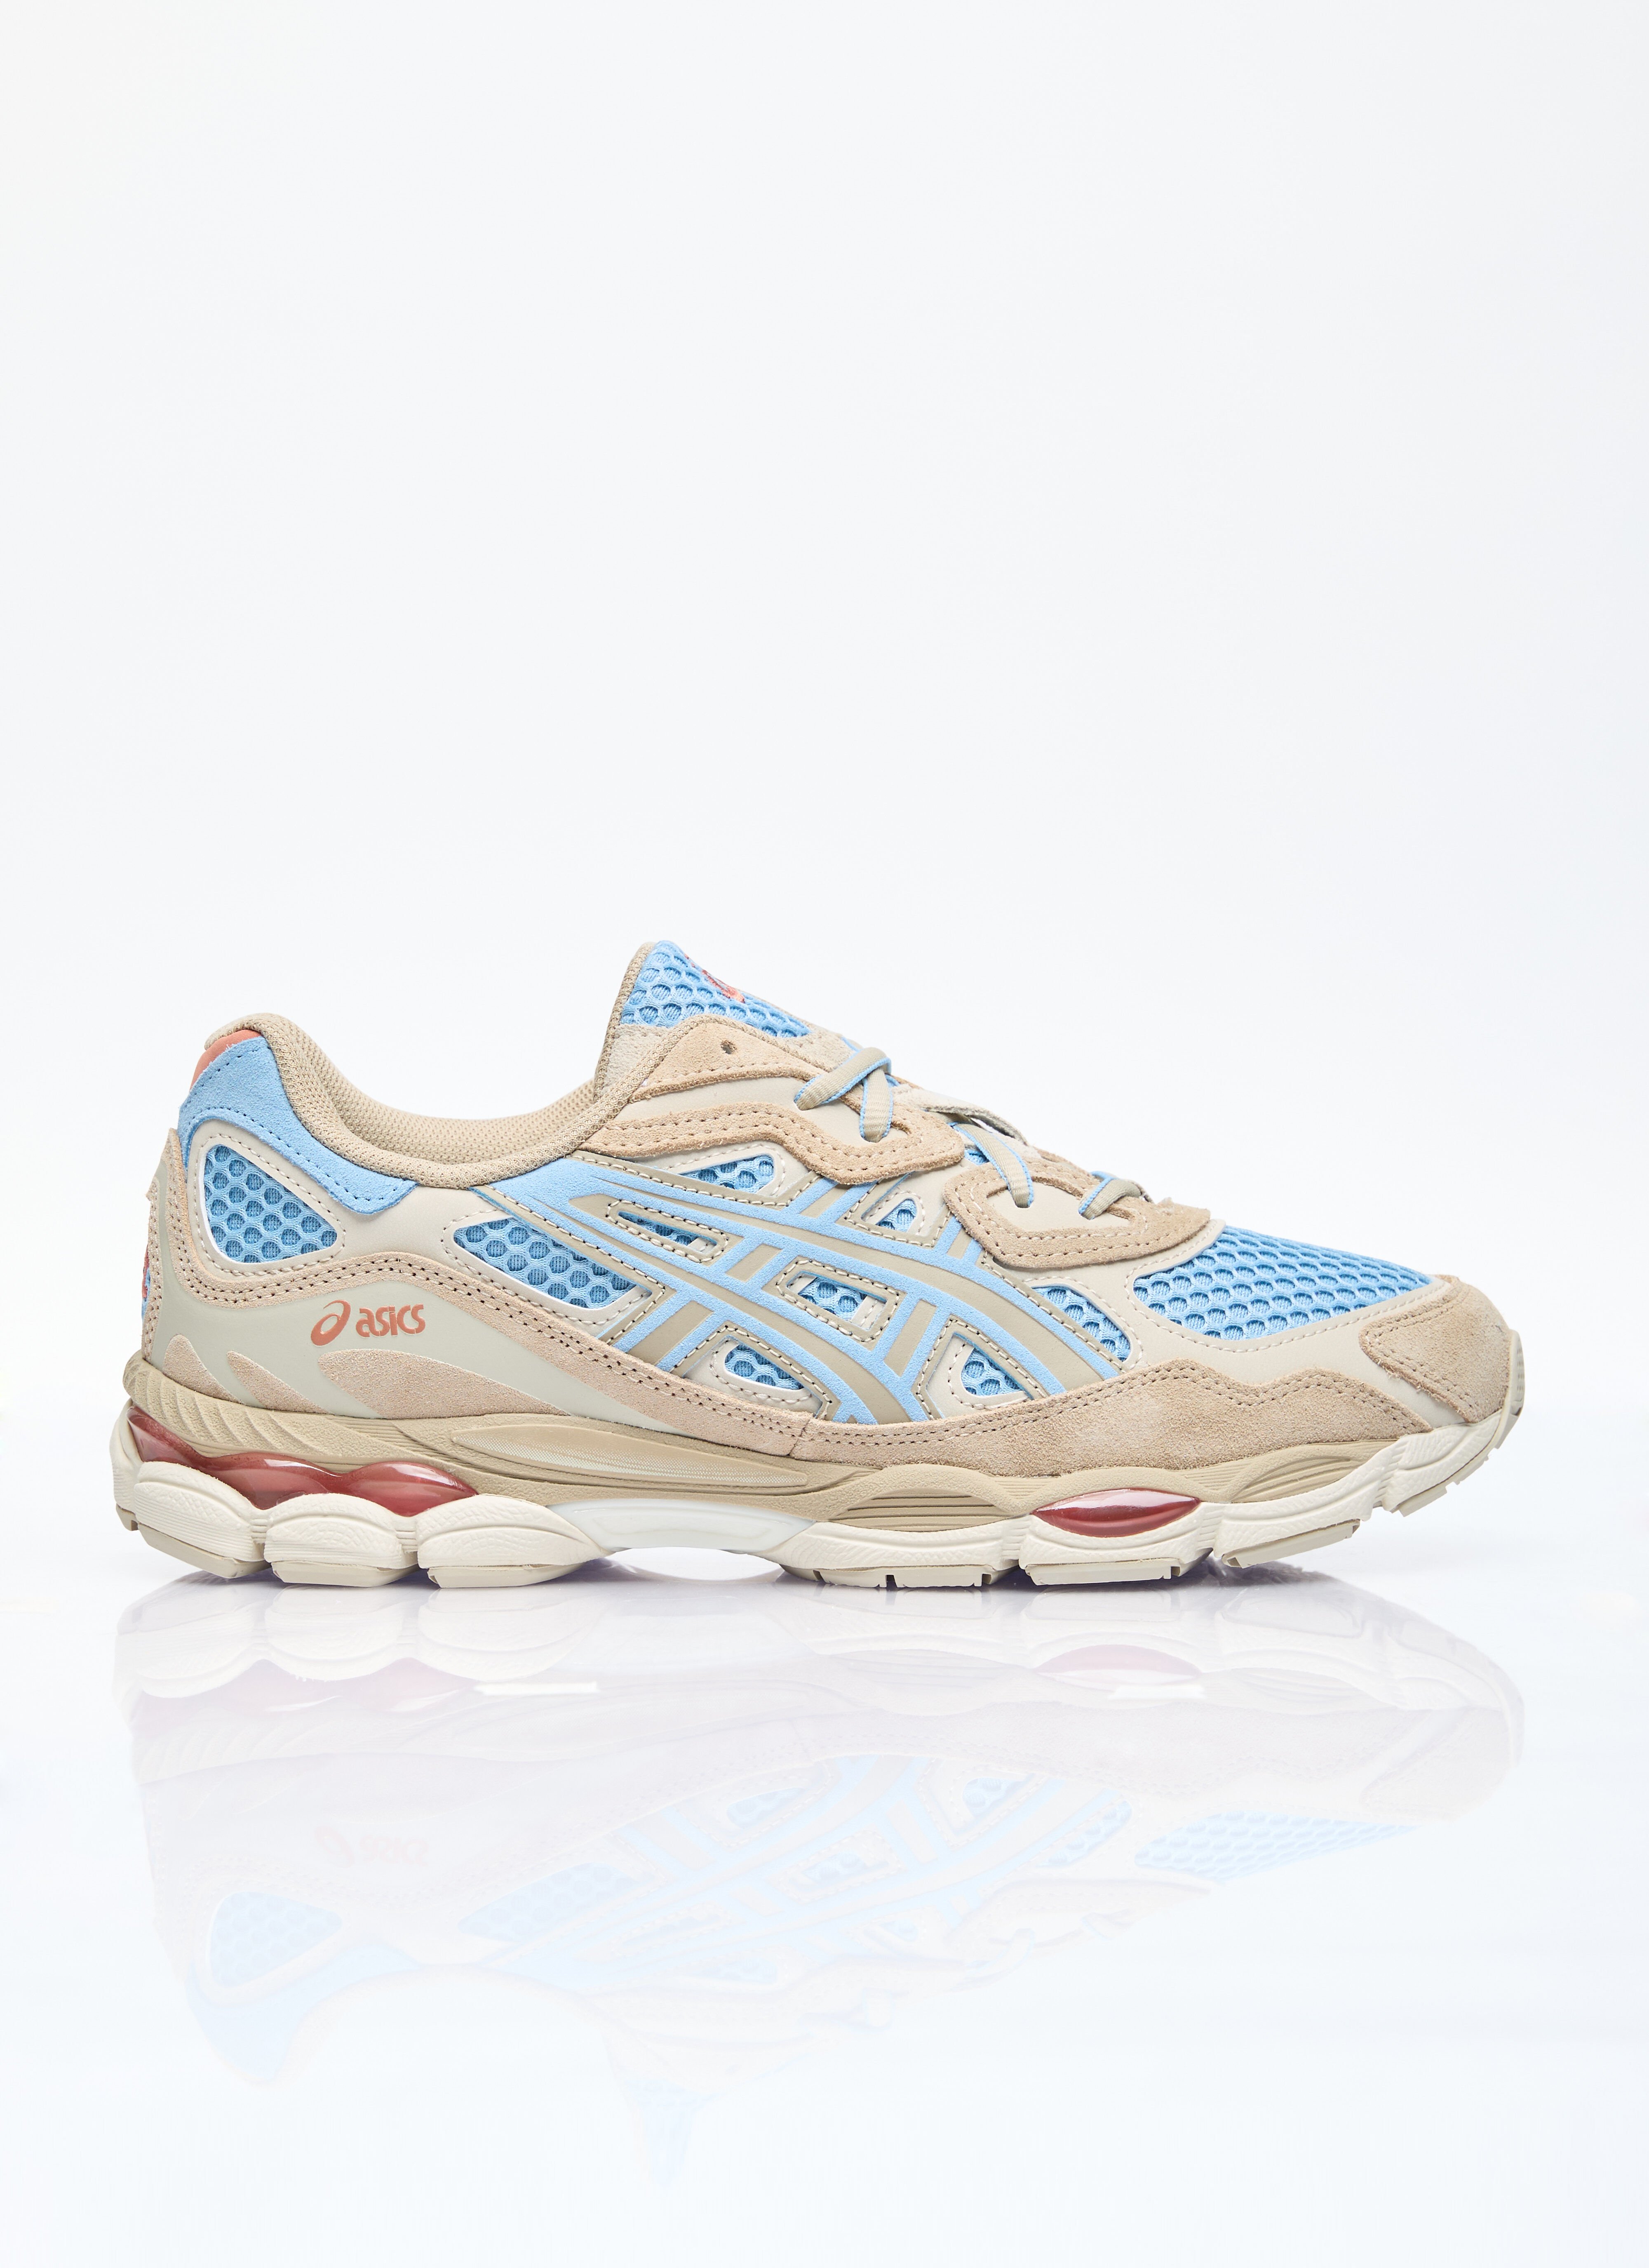 Asics x emmi Gel-NYC Sneakers Silver axe0257001